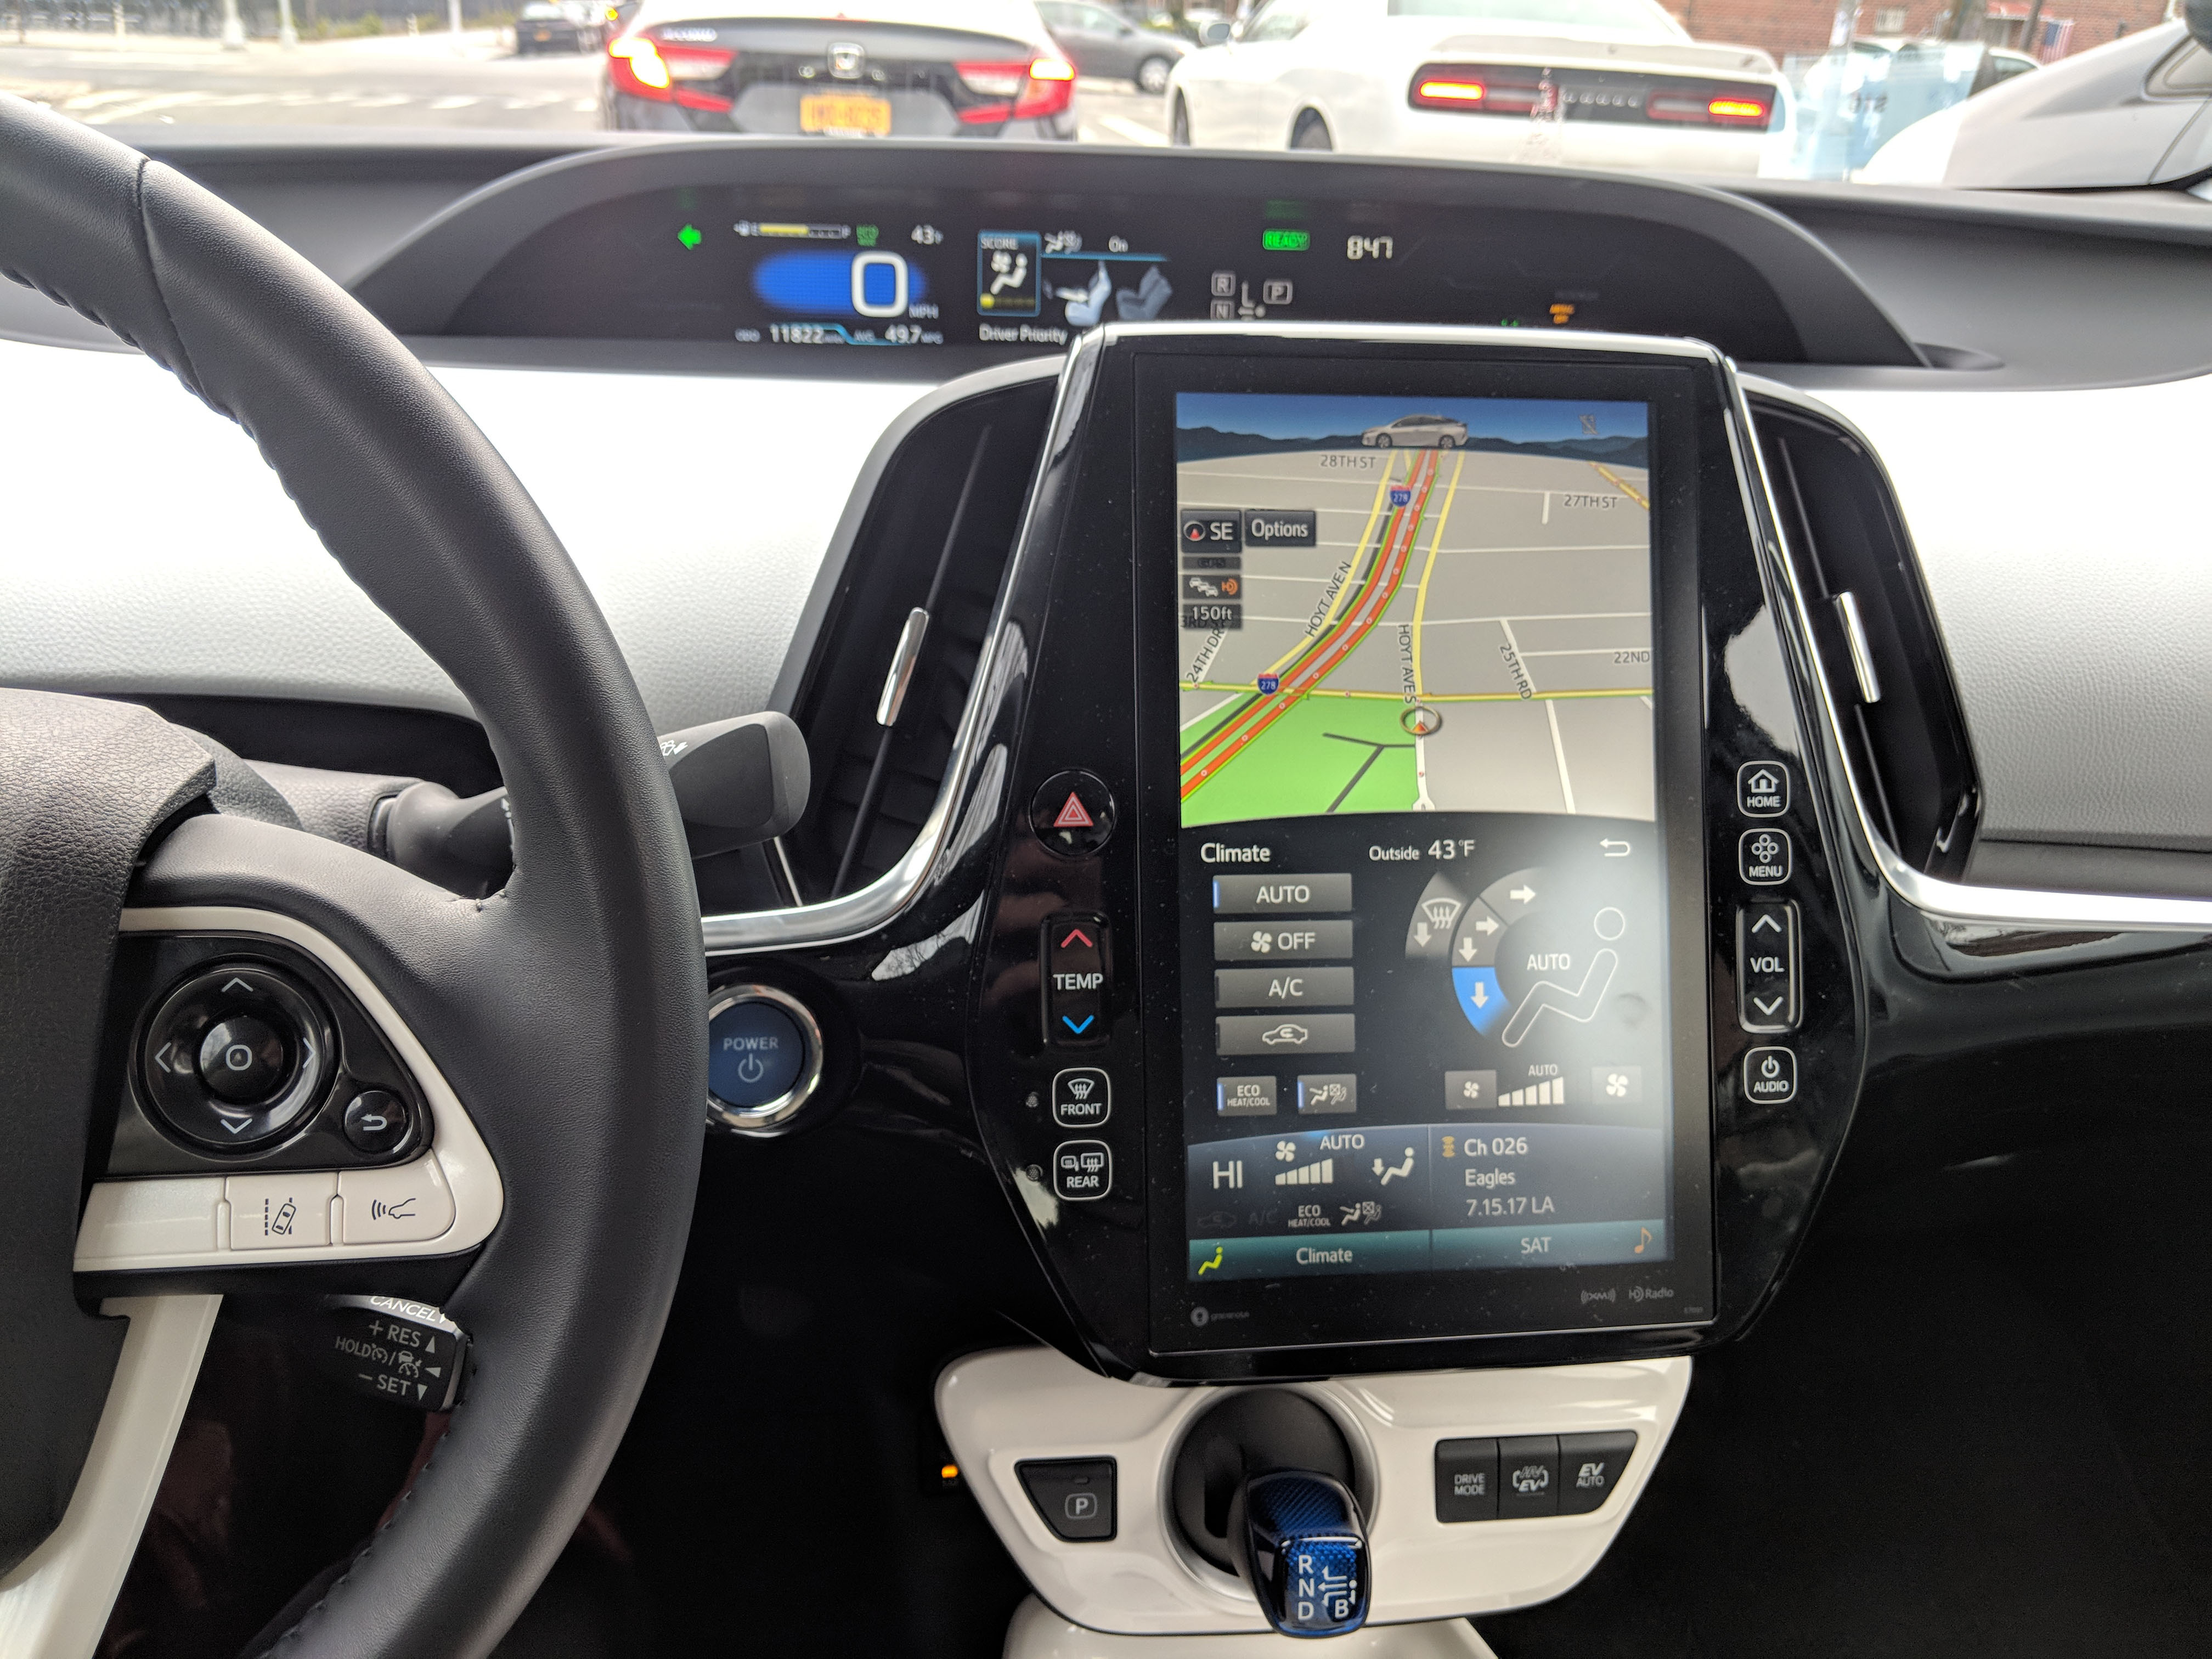 5 Technologies in Auto We Need to Embrace